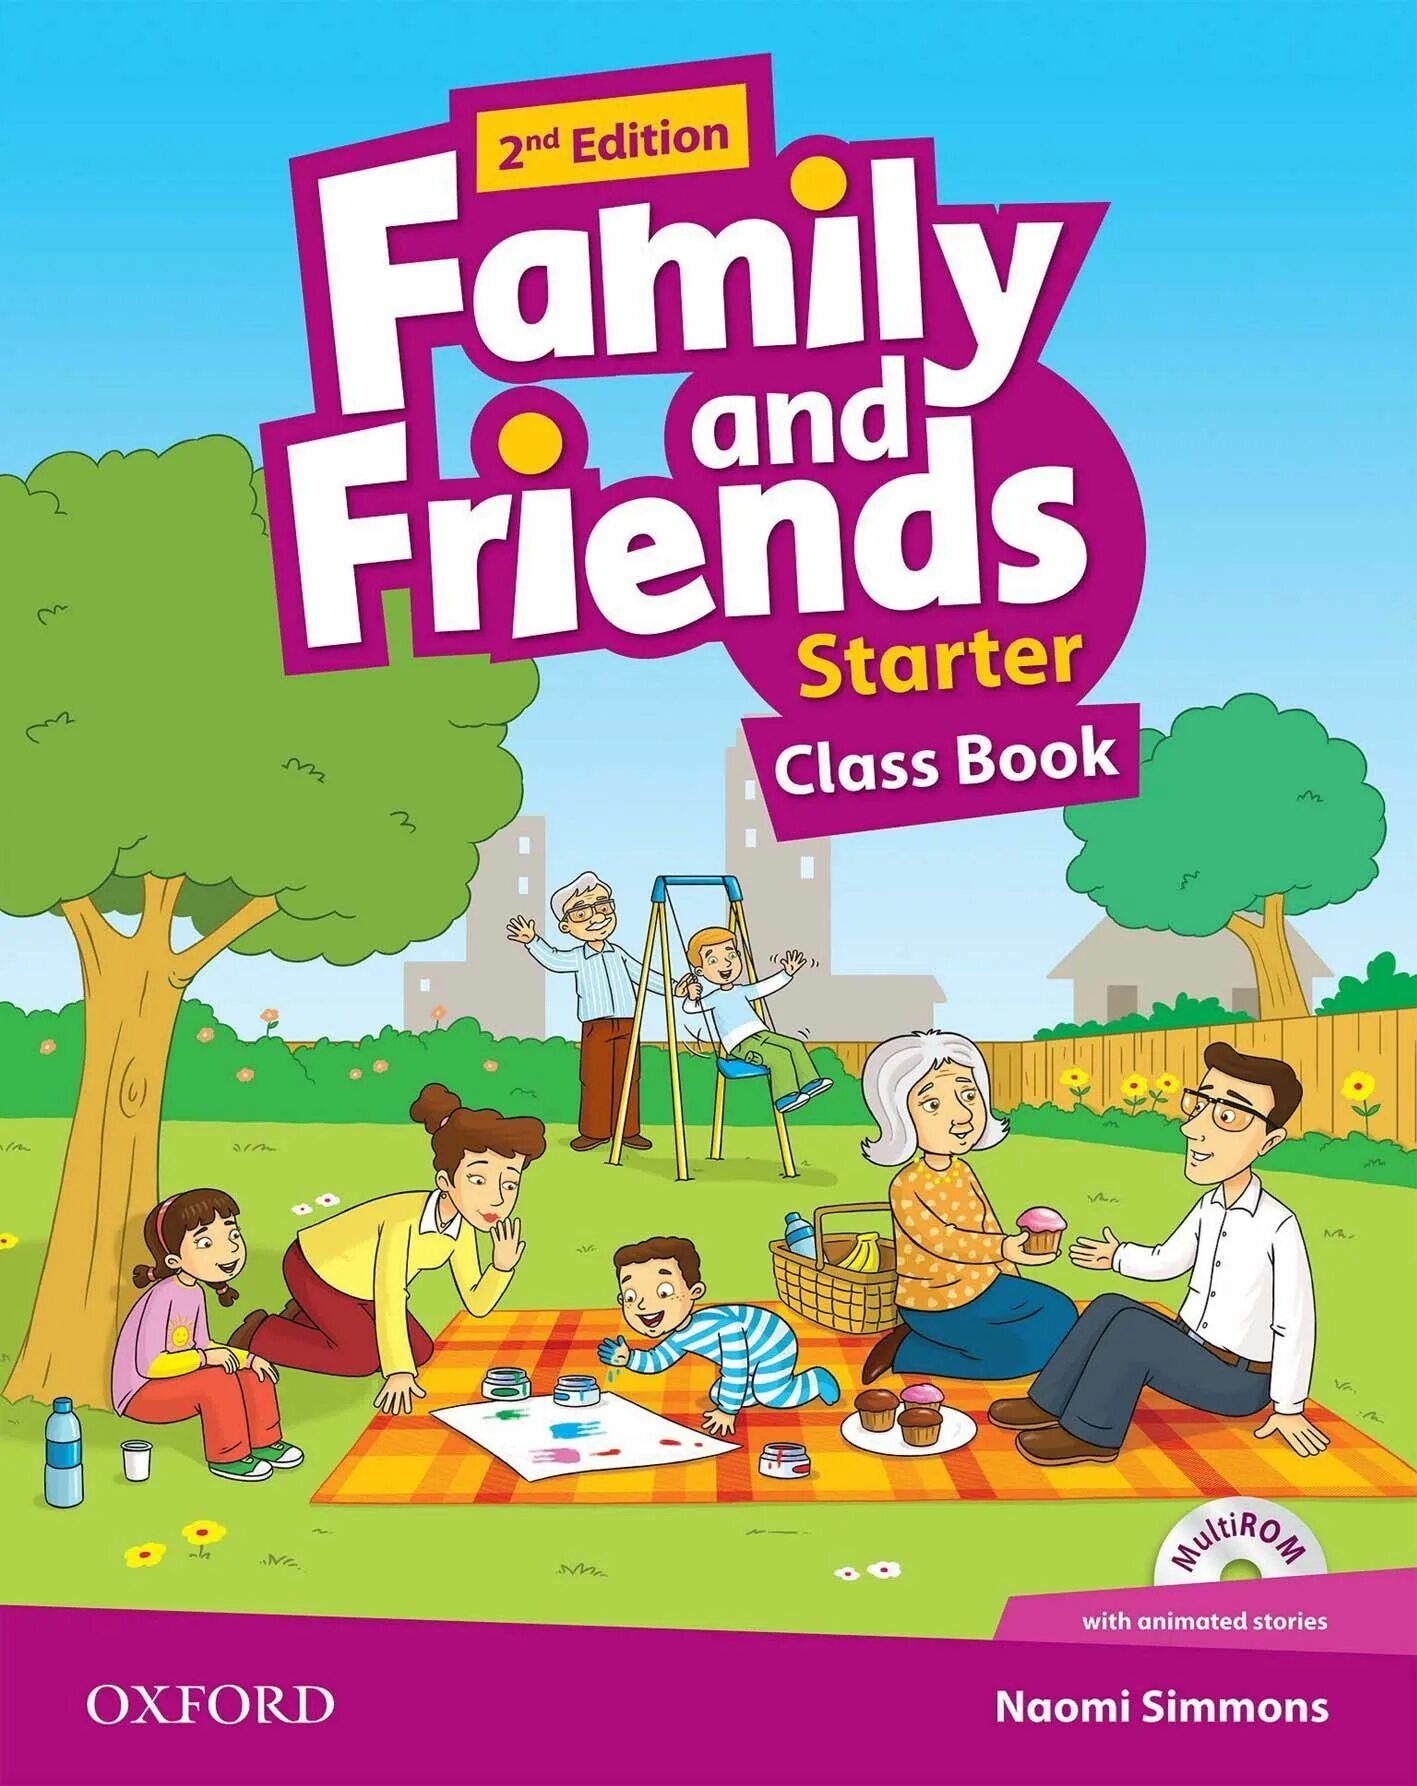 Family student book. Family and friends 2 Edition Classbook. Family and friends 2 class book Starter. Учебник Oxford Family and friends 2. 2nd Edition Family and friends Starter Workbook.